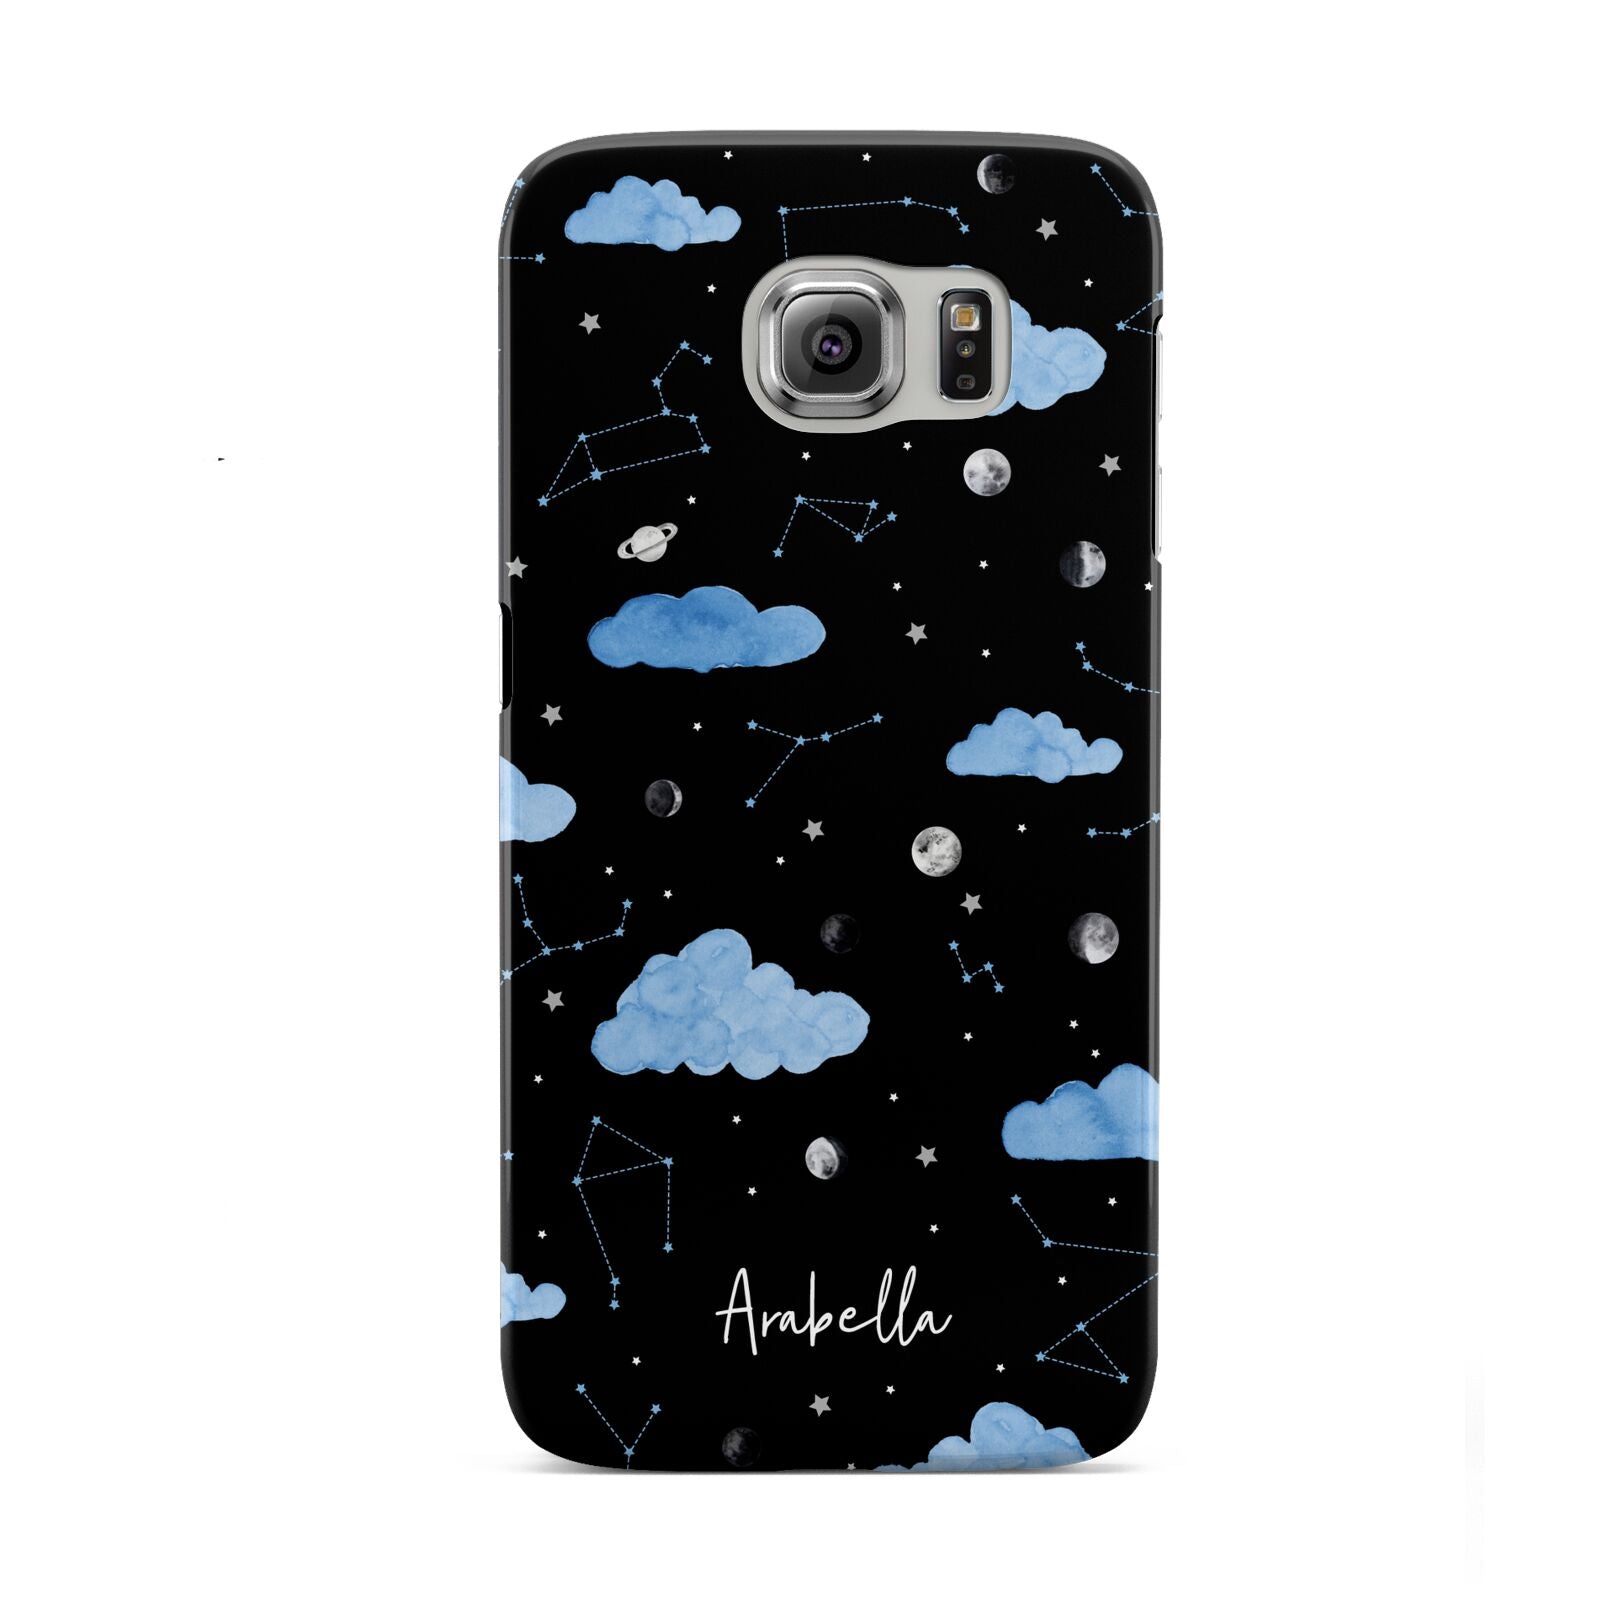 Cloudy Night Sky with Name Samsung Galaxy S6 Case